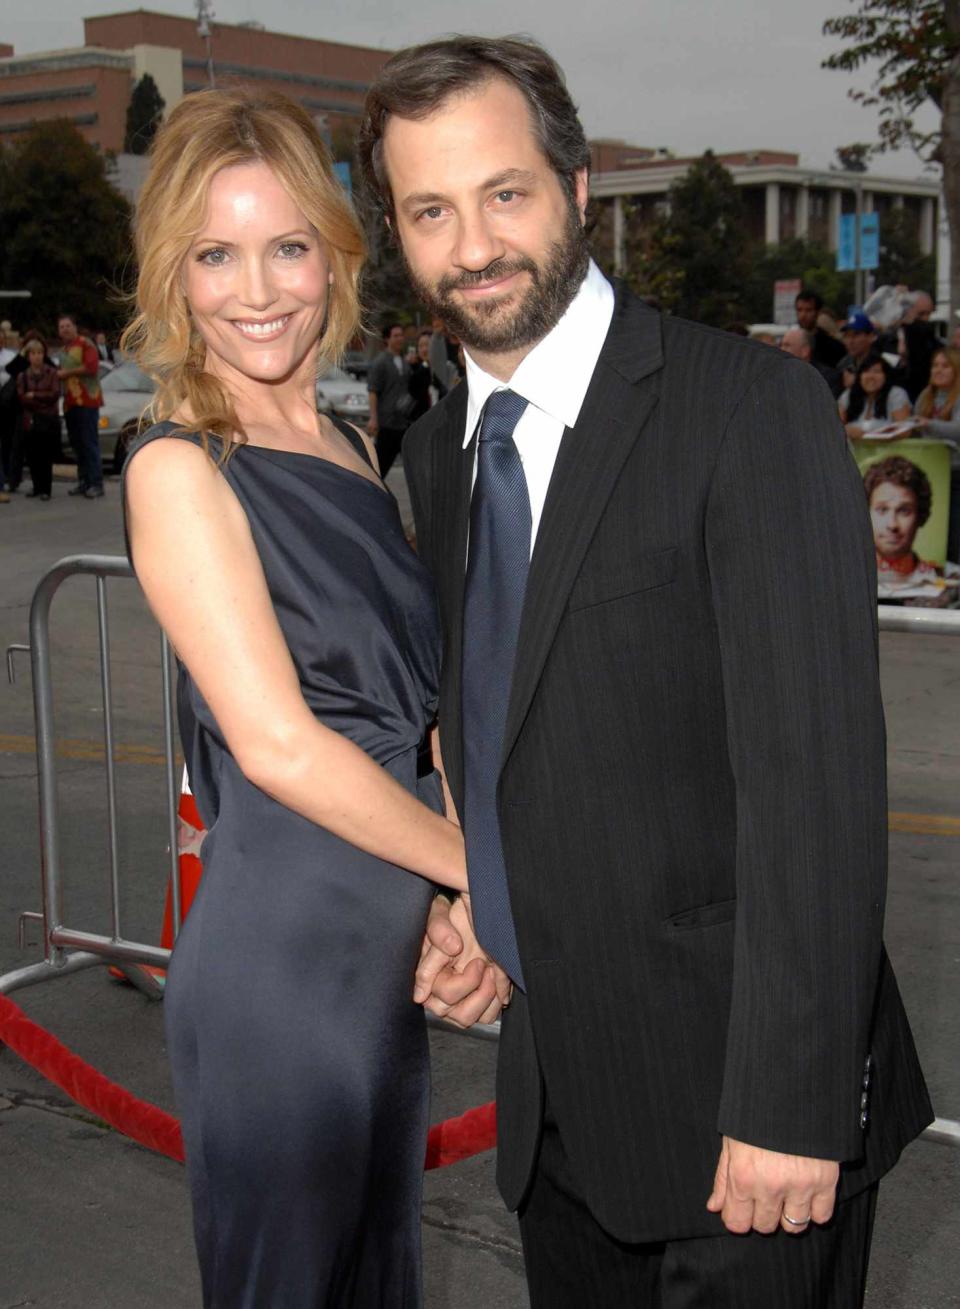 Leslie Mann and husband Judd Apatow during "Knocked Up" Los Angeles Premiere- Arrivals at Mann Village Theater in Westwood, California, United States